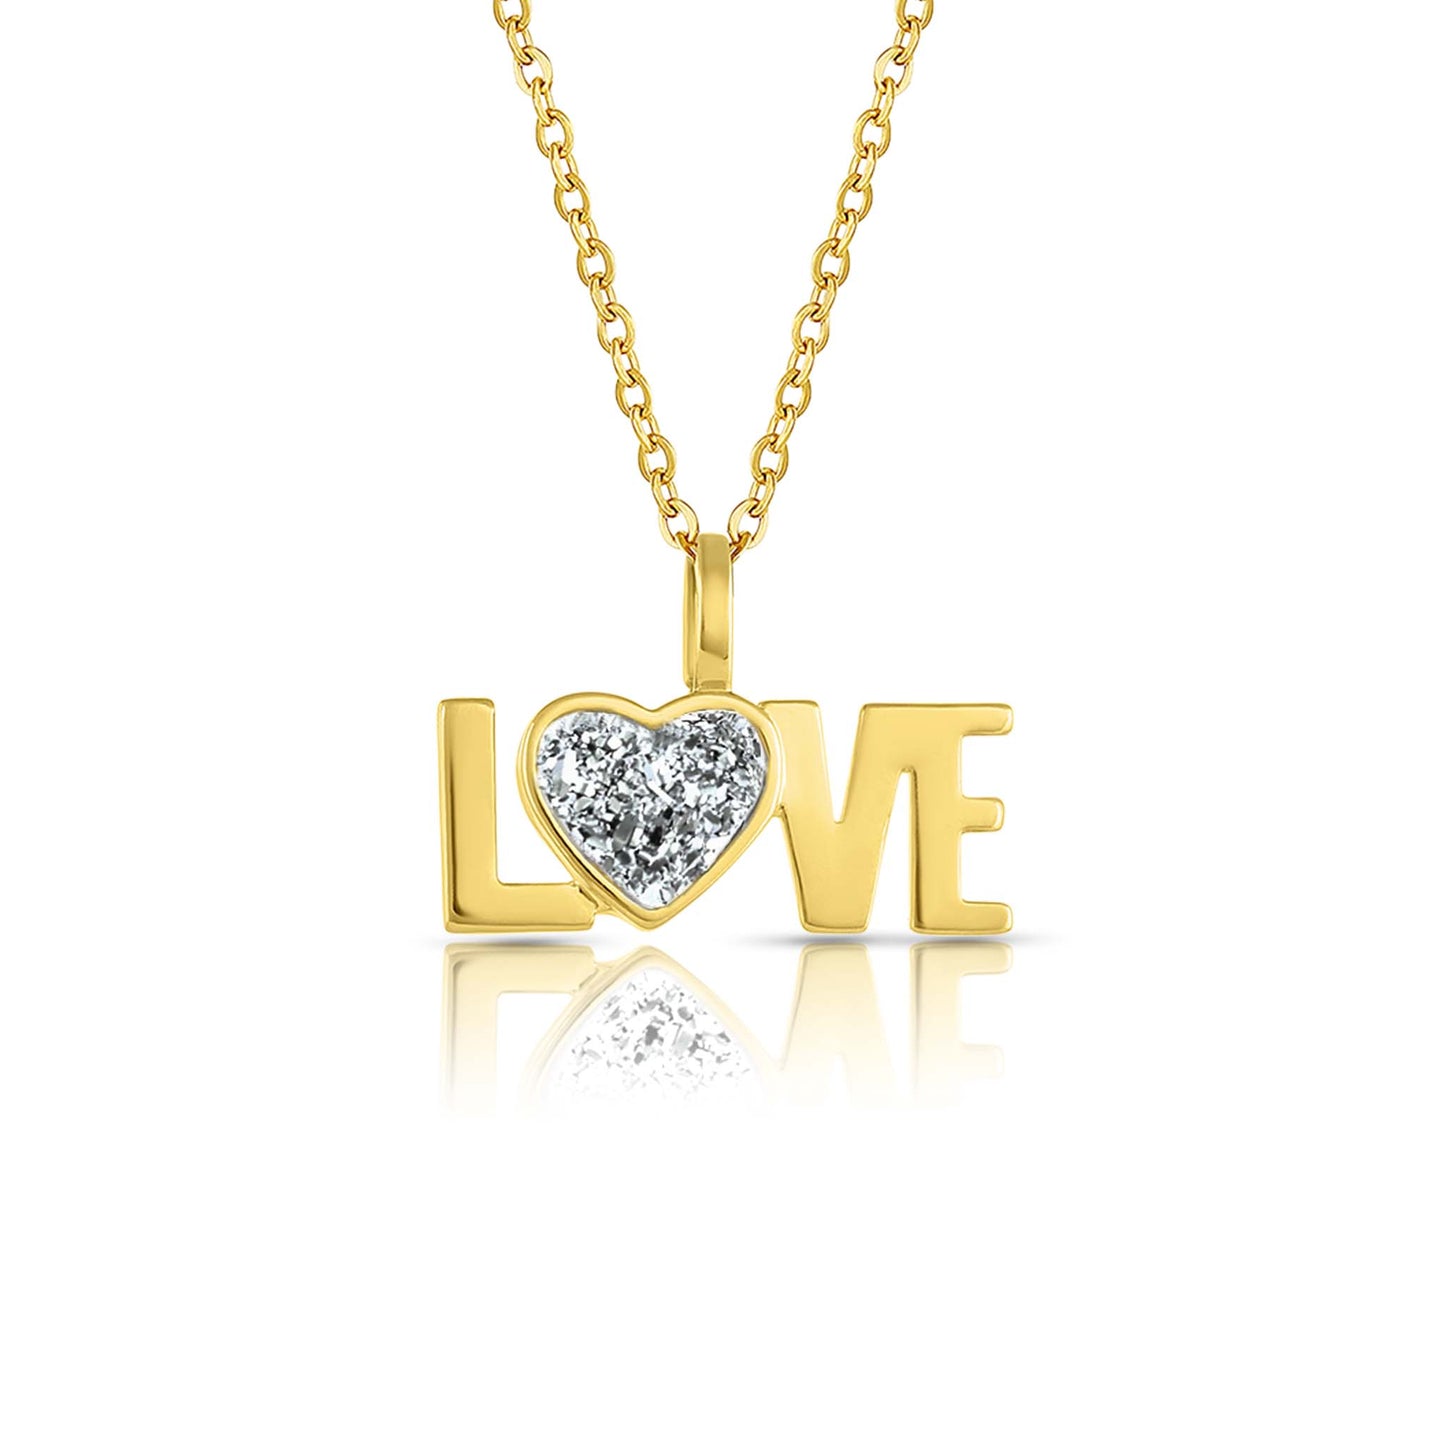 18kt Yellow Gold Love word charm necklace with a heart shaped natural Quartz Druzy Crystal made by Born to Rock. Online Jewelry store based in San Diego California